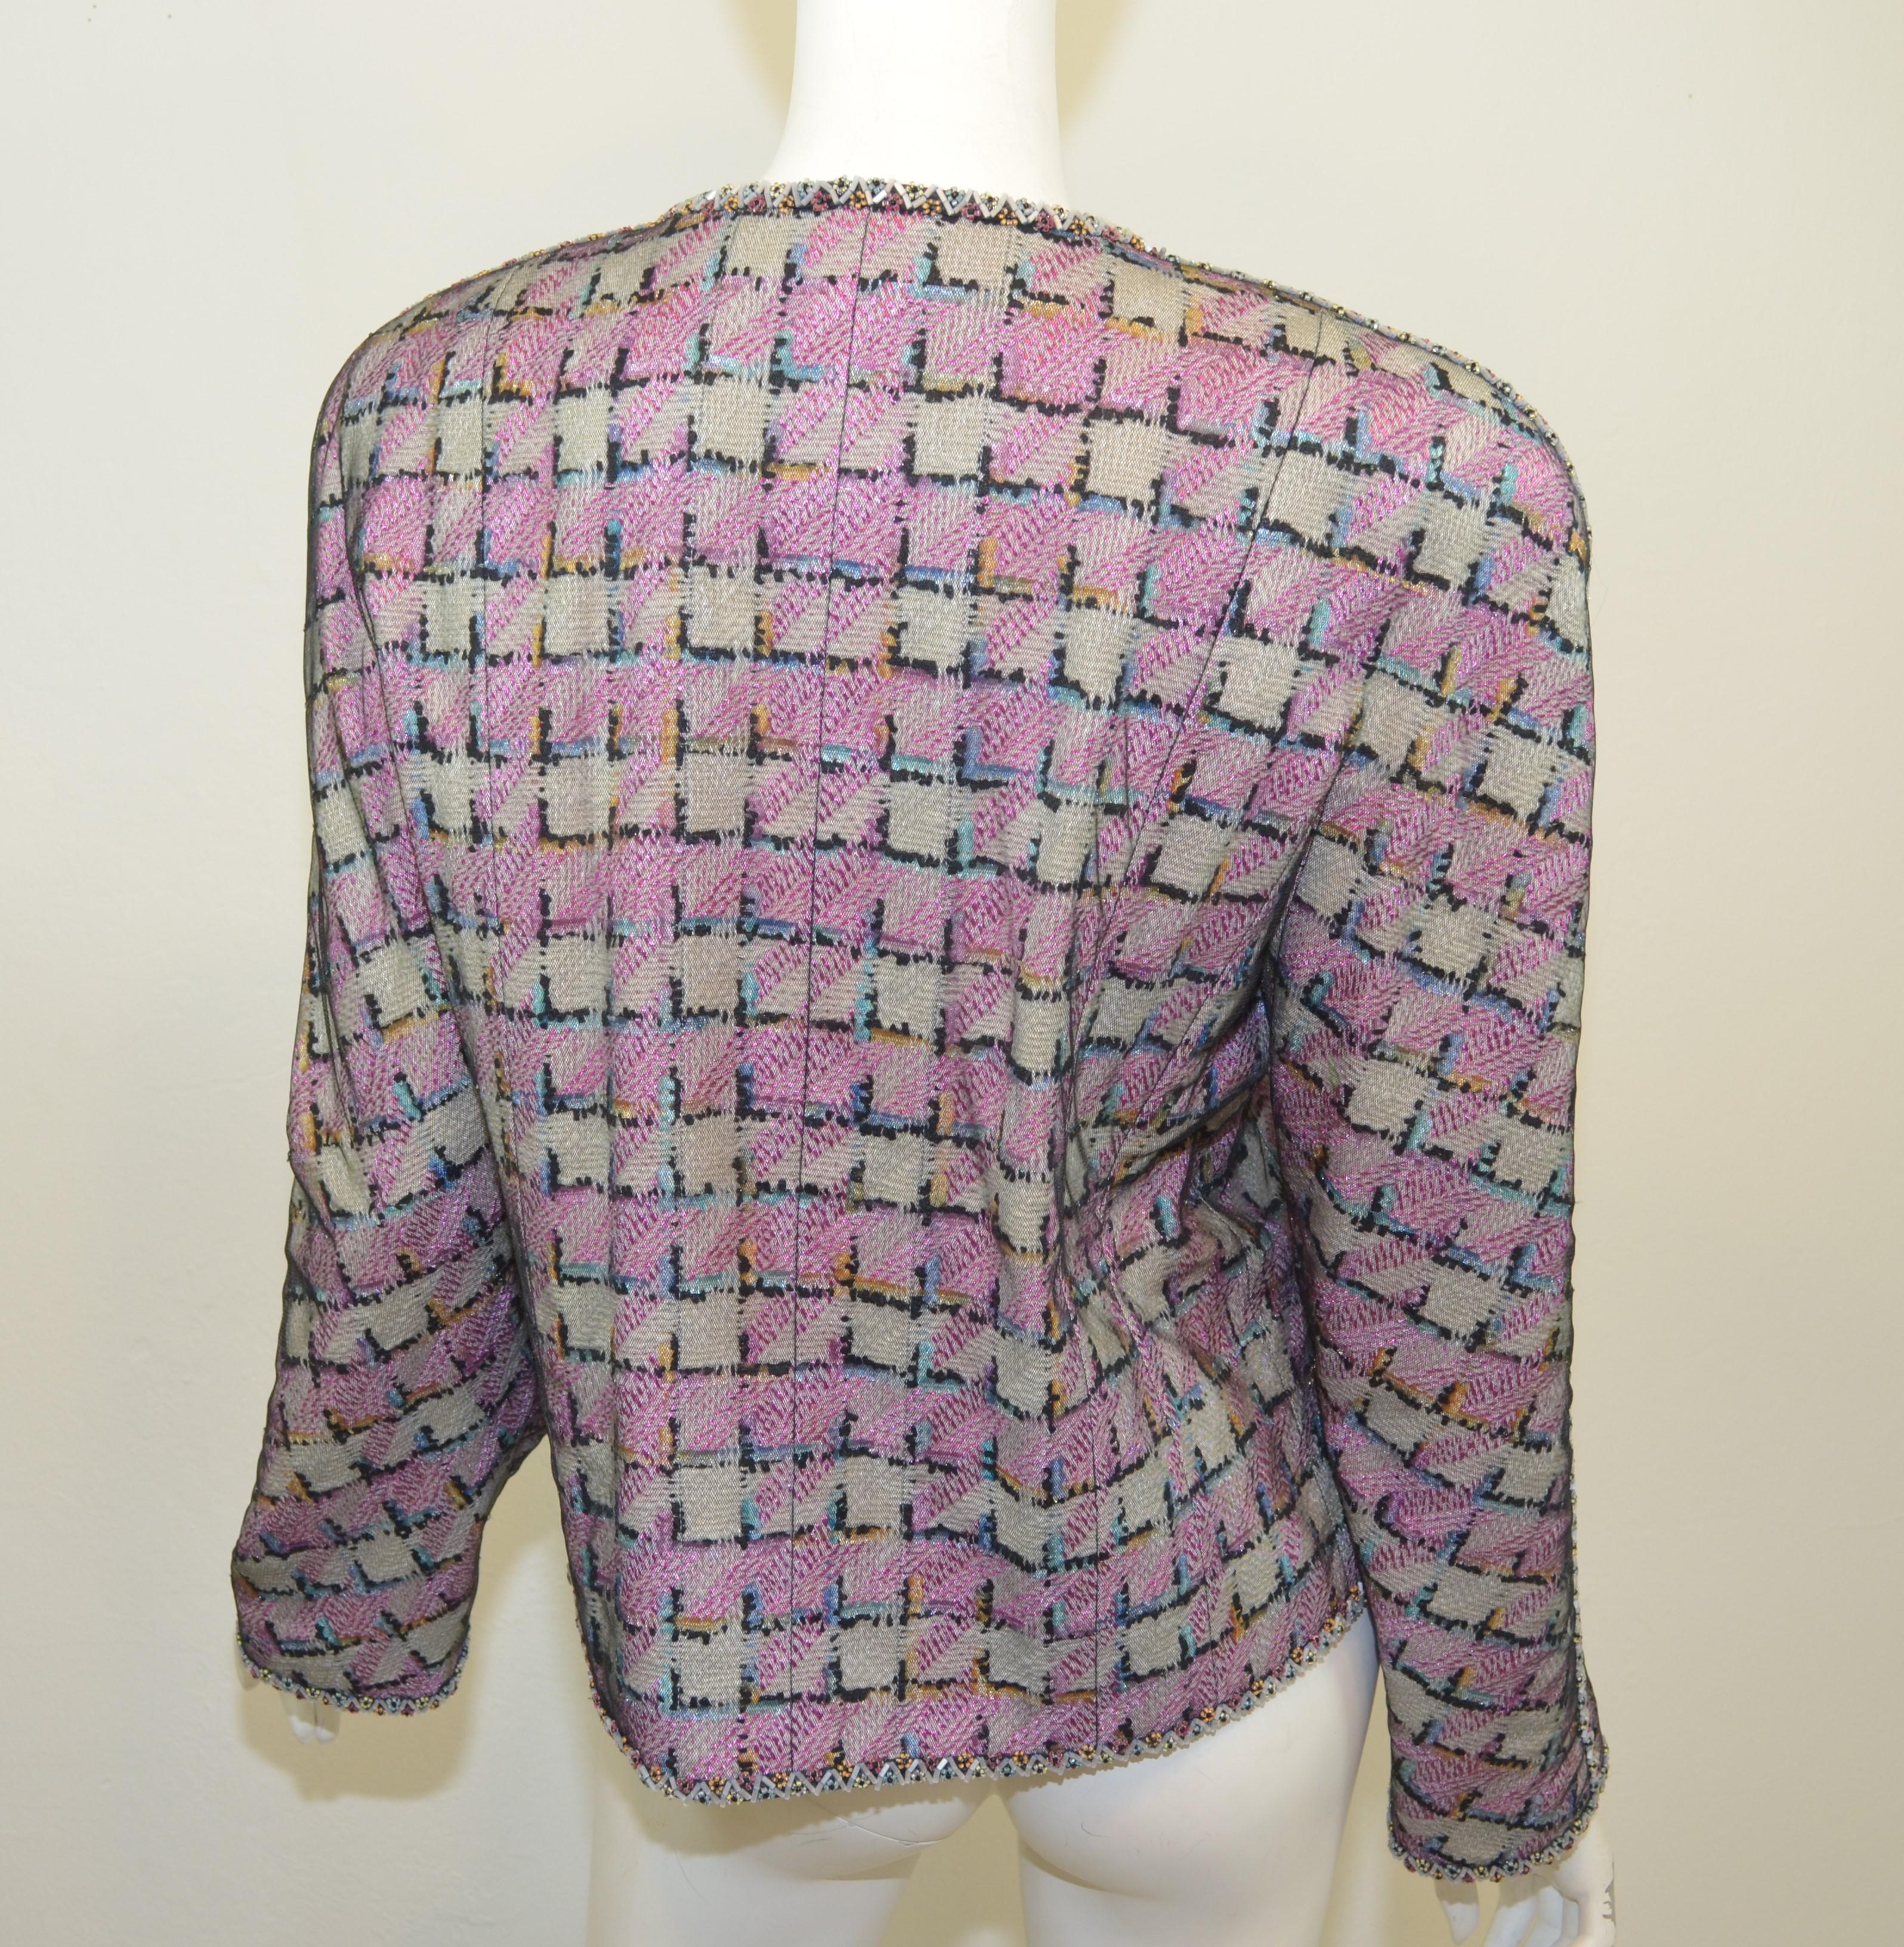 1998 C Chanel Multicolor Embellished Jacket with Mesh Overlay For Sale 1